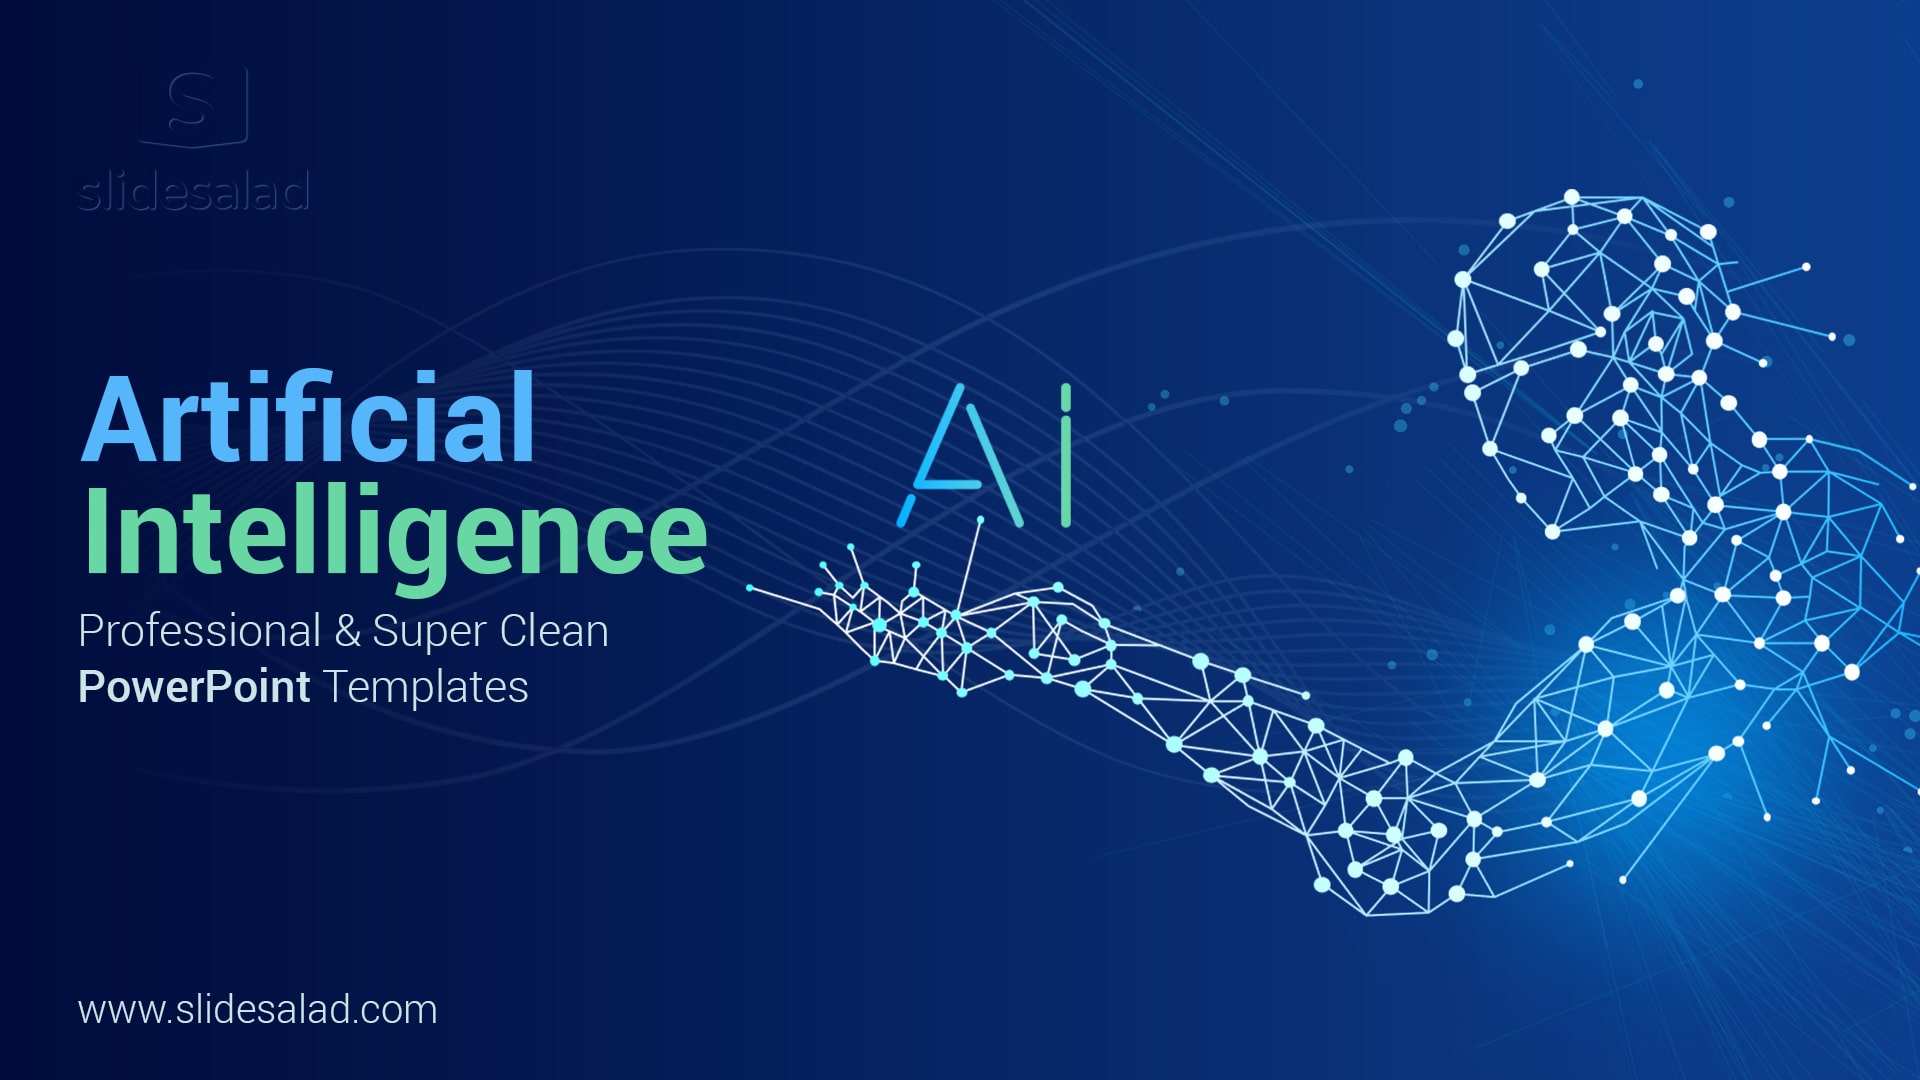 Artificial Intelligence PowerPoint Template Designs - Create a Comprehensive Presentation on Simulation of Human Intelligence in Machines